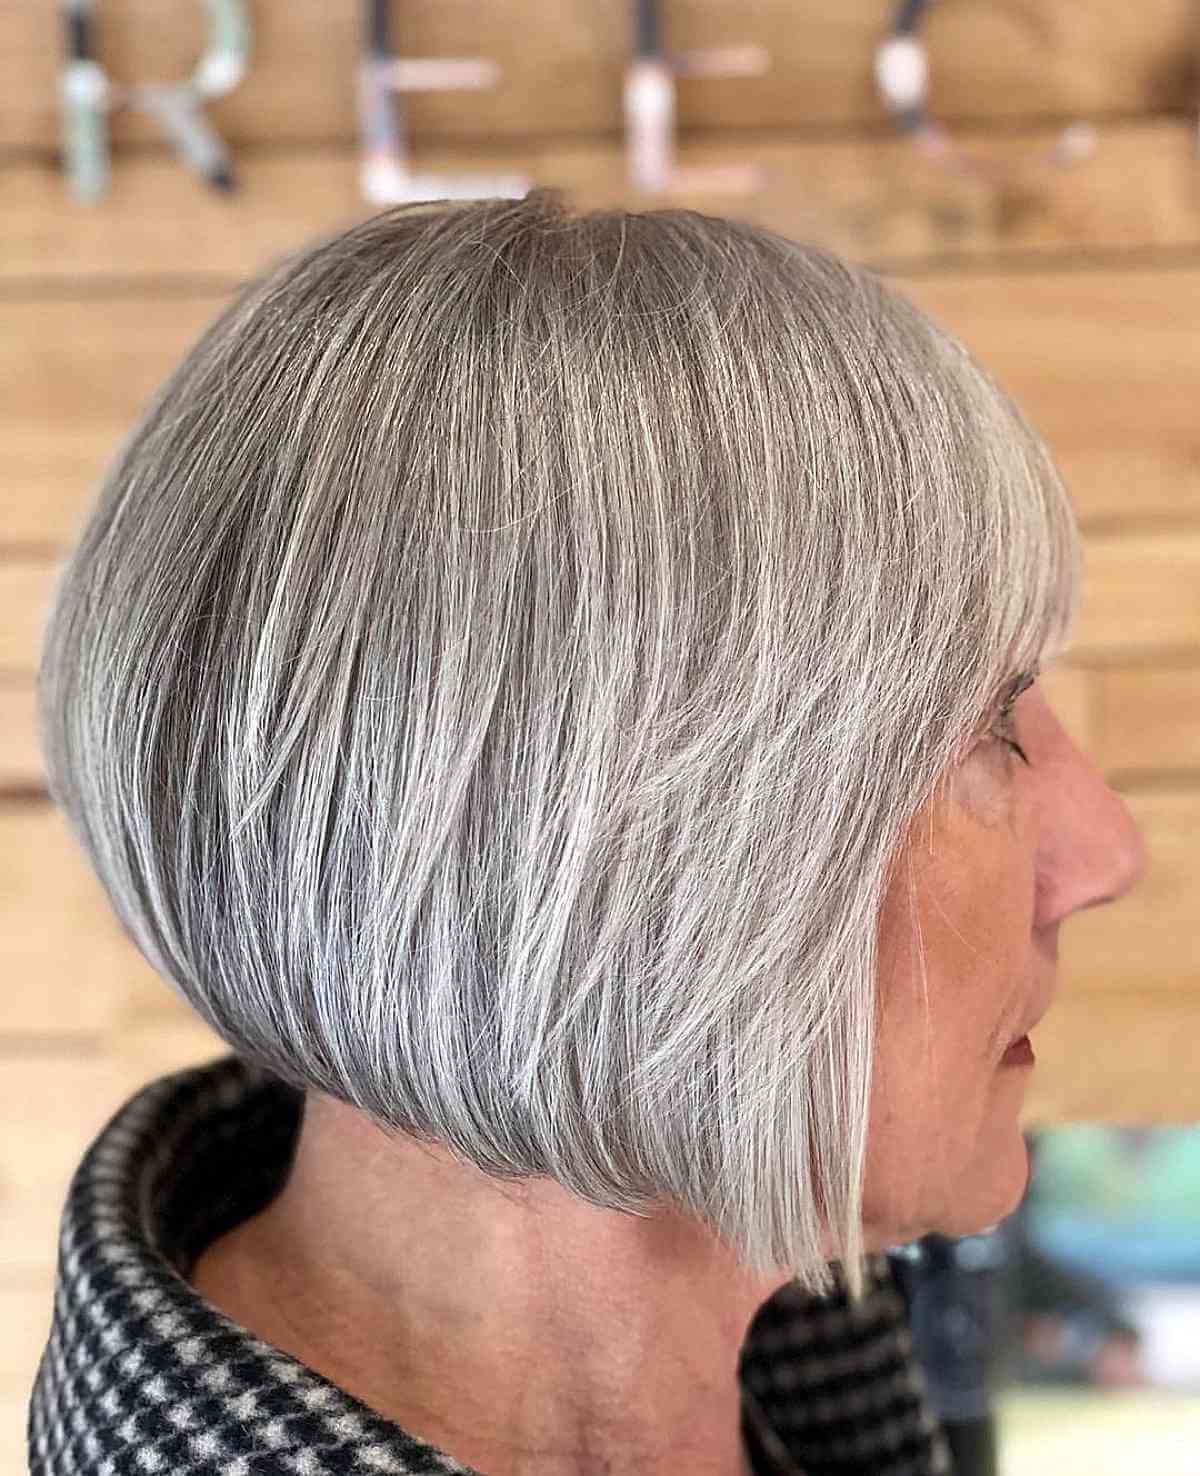 The Definitive Guide to Covering Grey Hair - Ugly Duckling